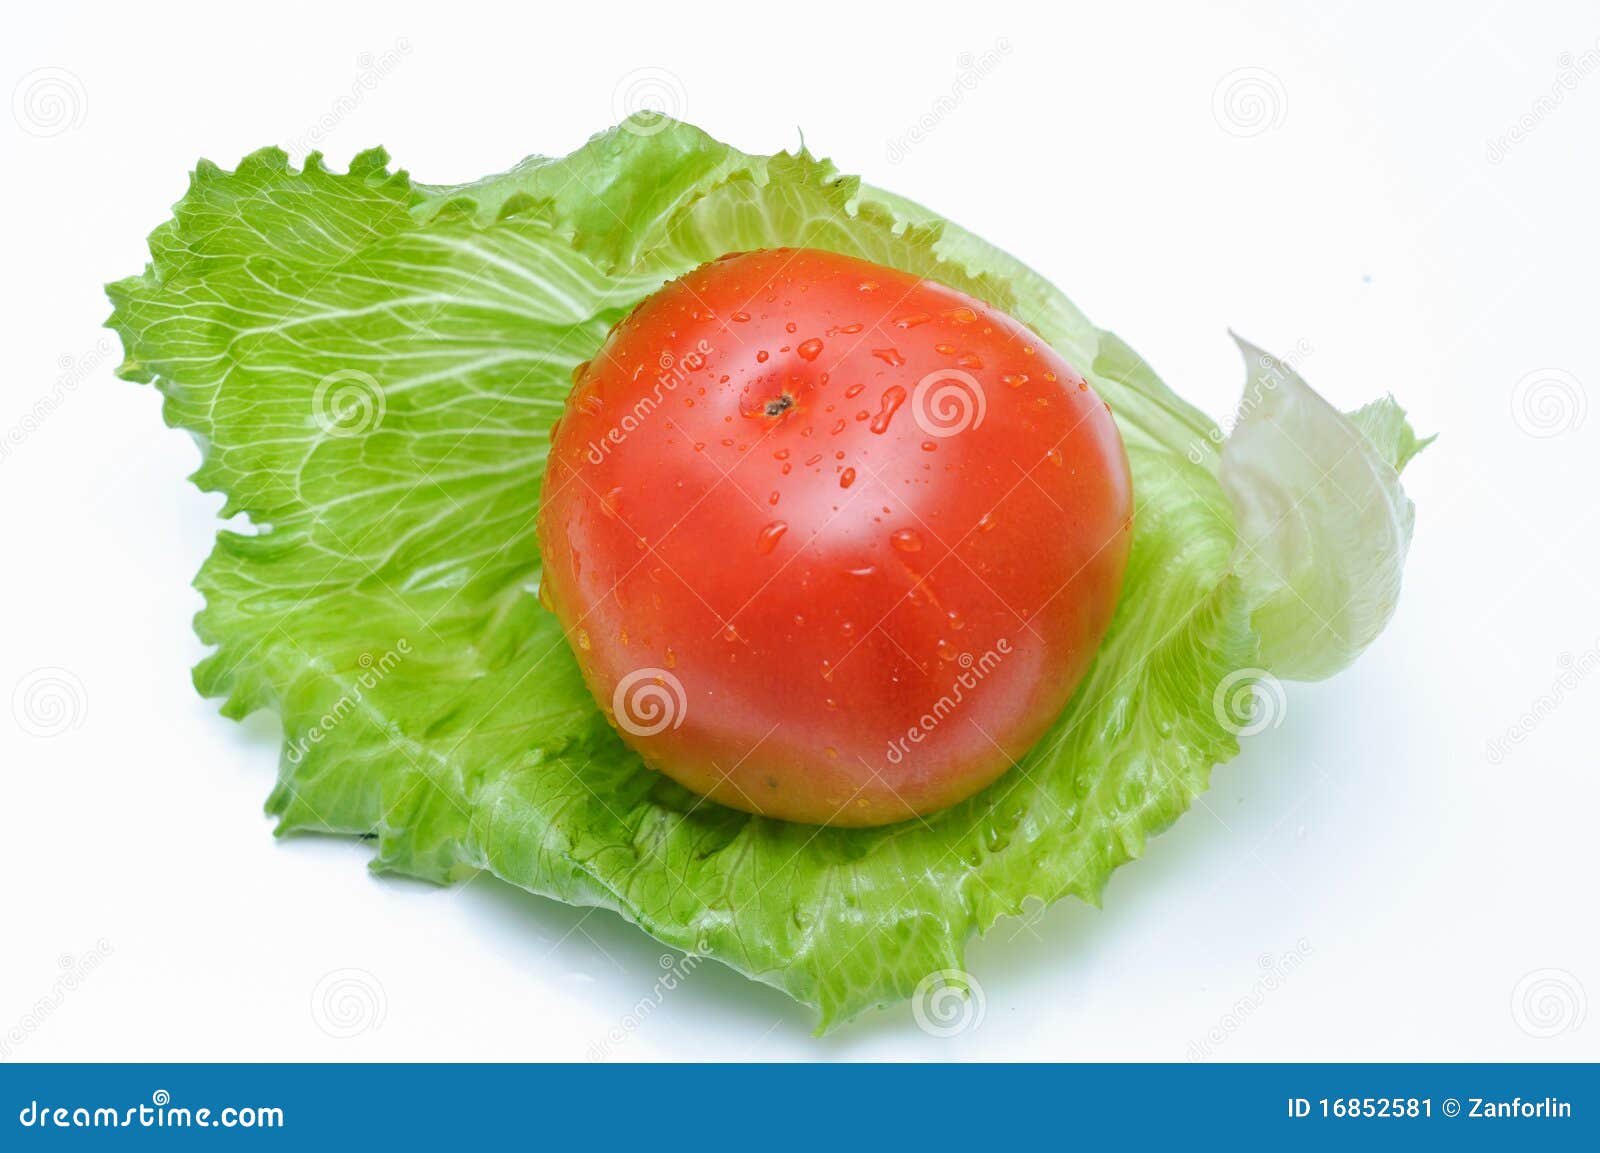 tomato with lettuce